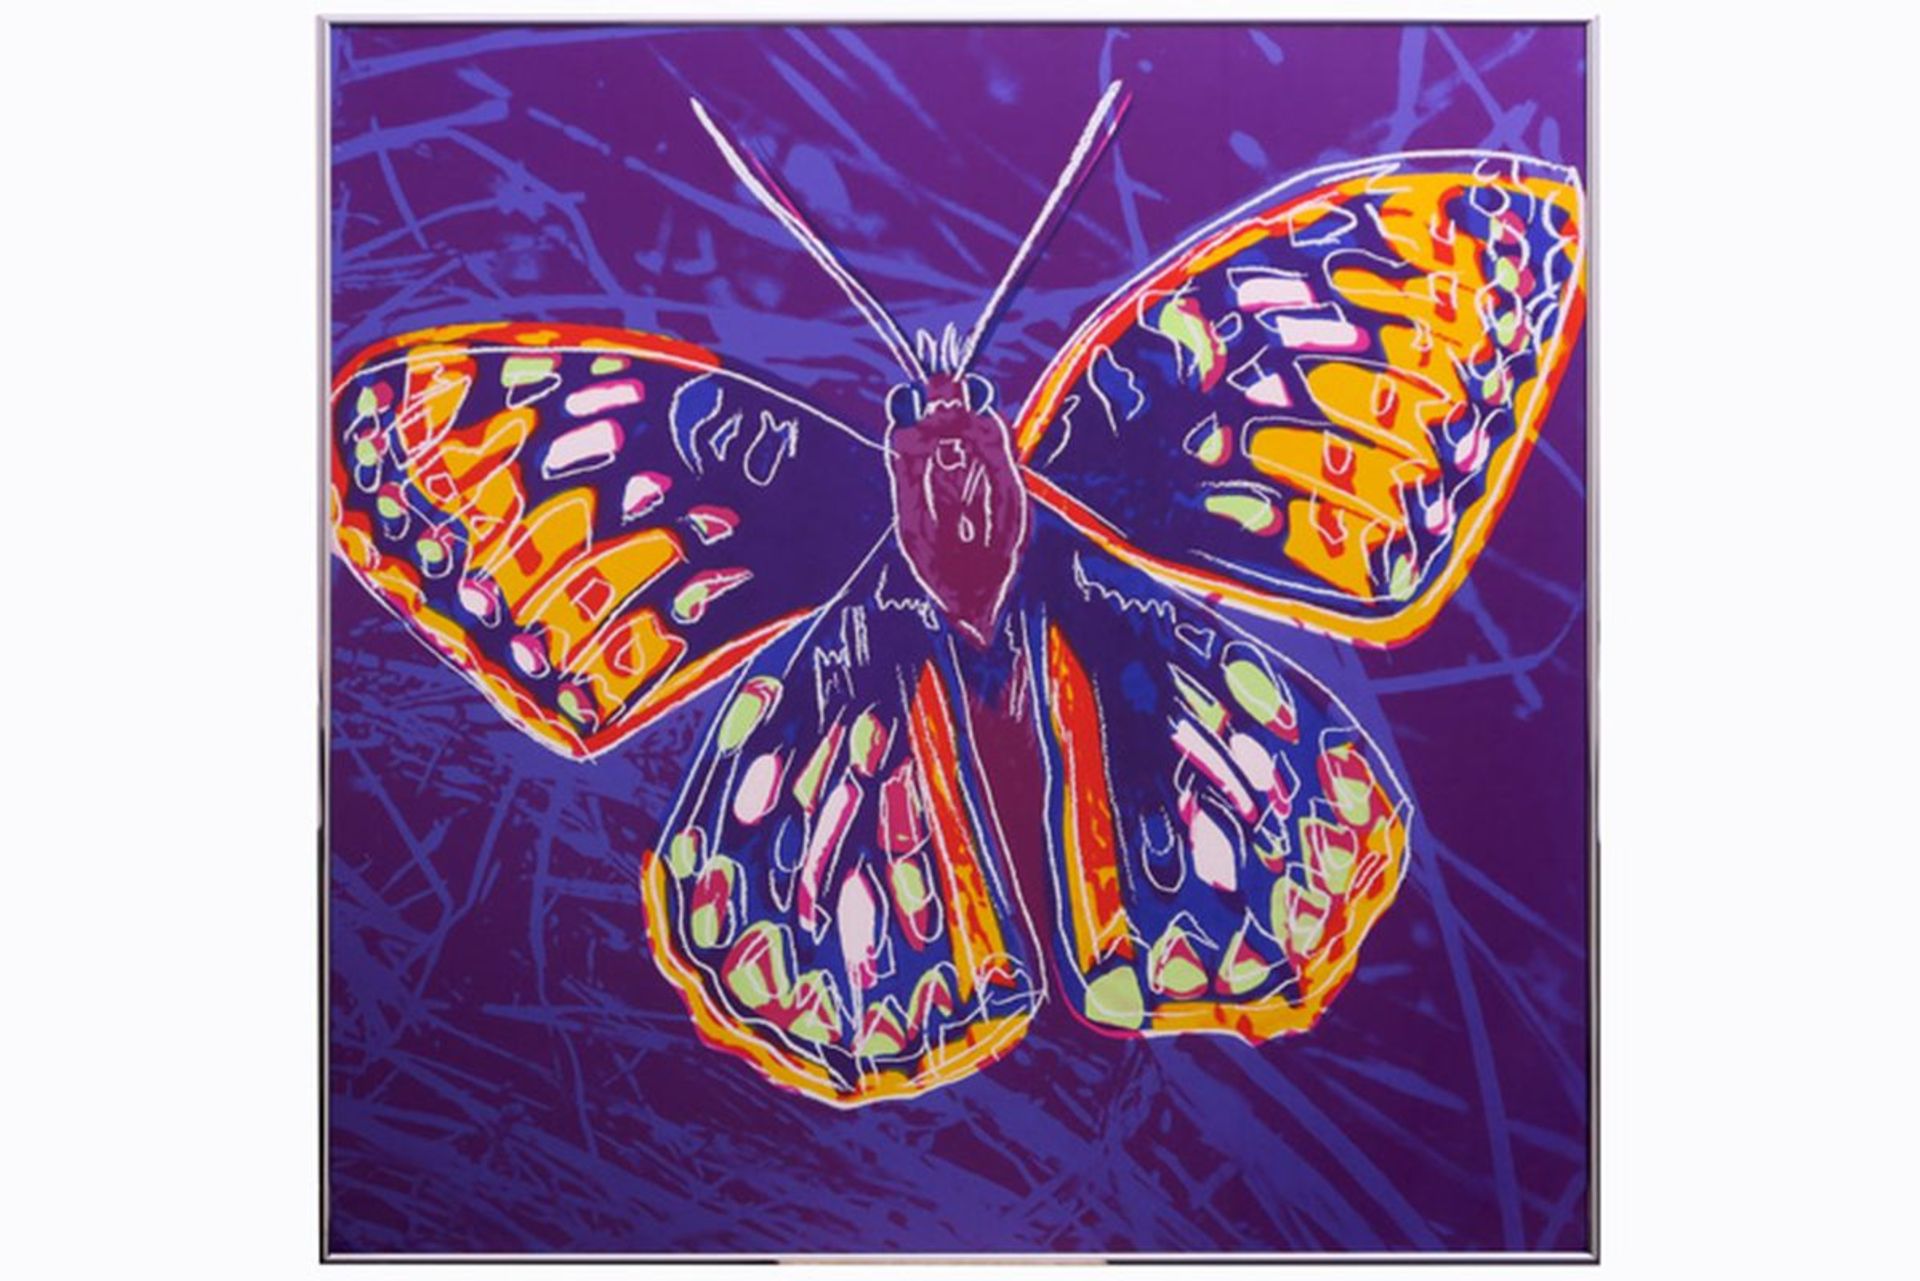 Andy Warhol "San Francisco Silverspot butterfy" screenprint in colors on Lennox [...]